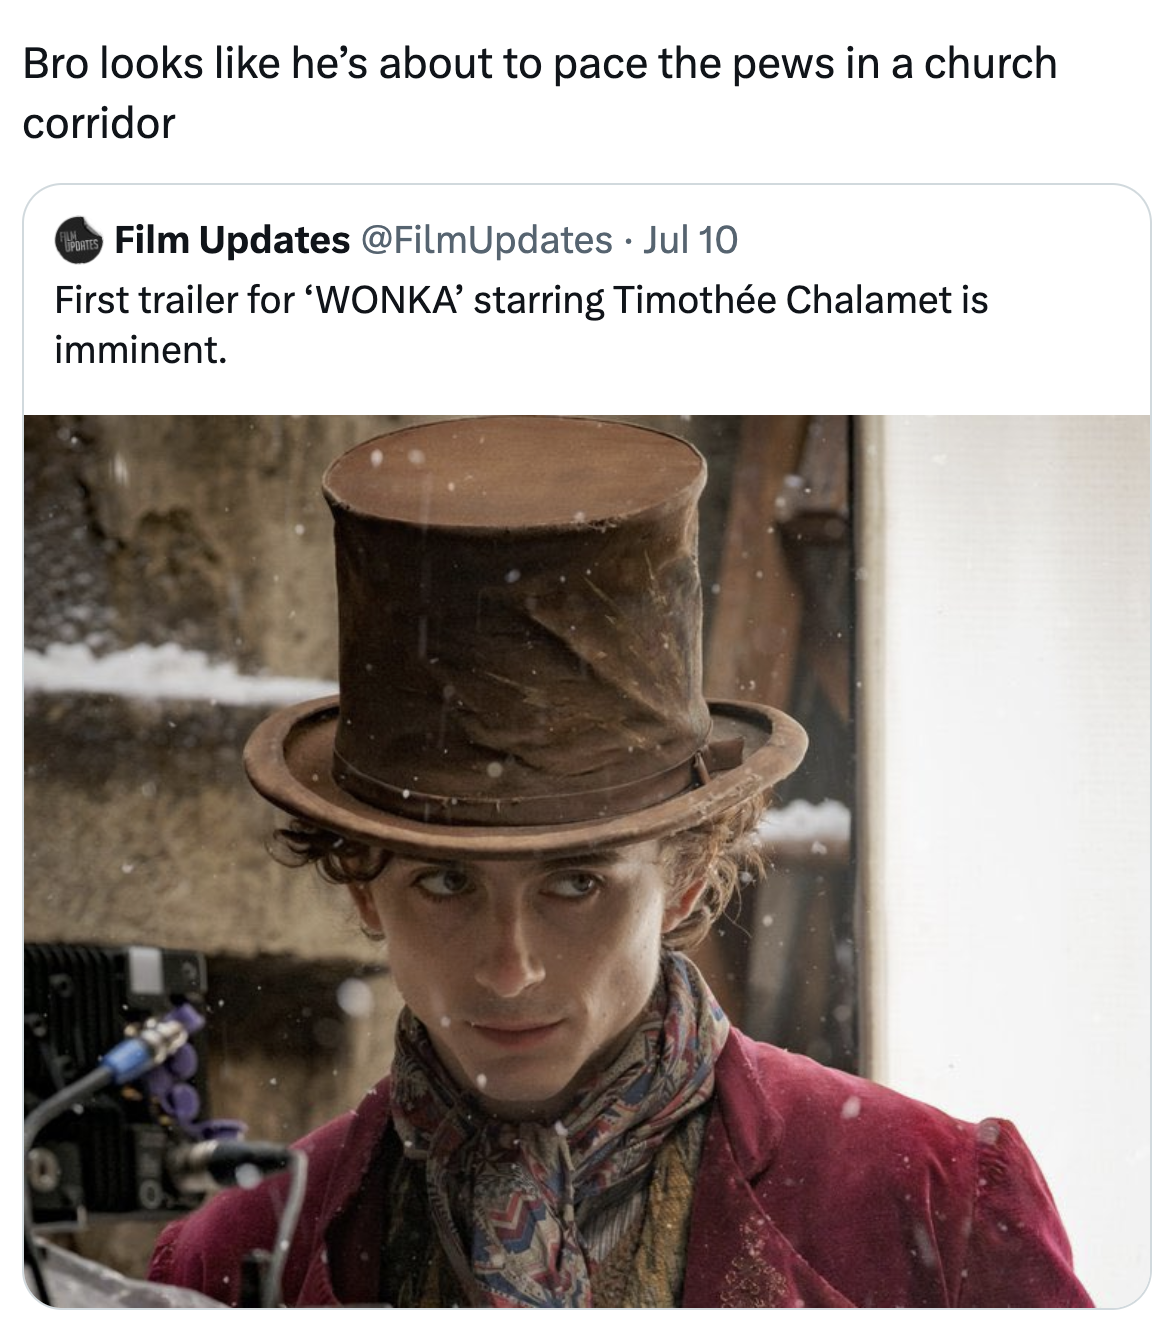 twitter highlights funny tweets  - willy wonka movie 2023 - Bro looks he's about to pace the pews in a church corridor Film Updates . Jul 10 First trailer for 'Wonka' starring Timothe Chalamet is imminent.